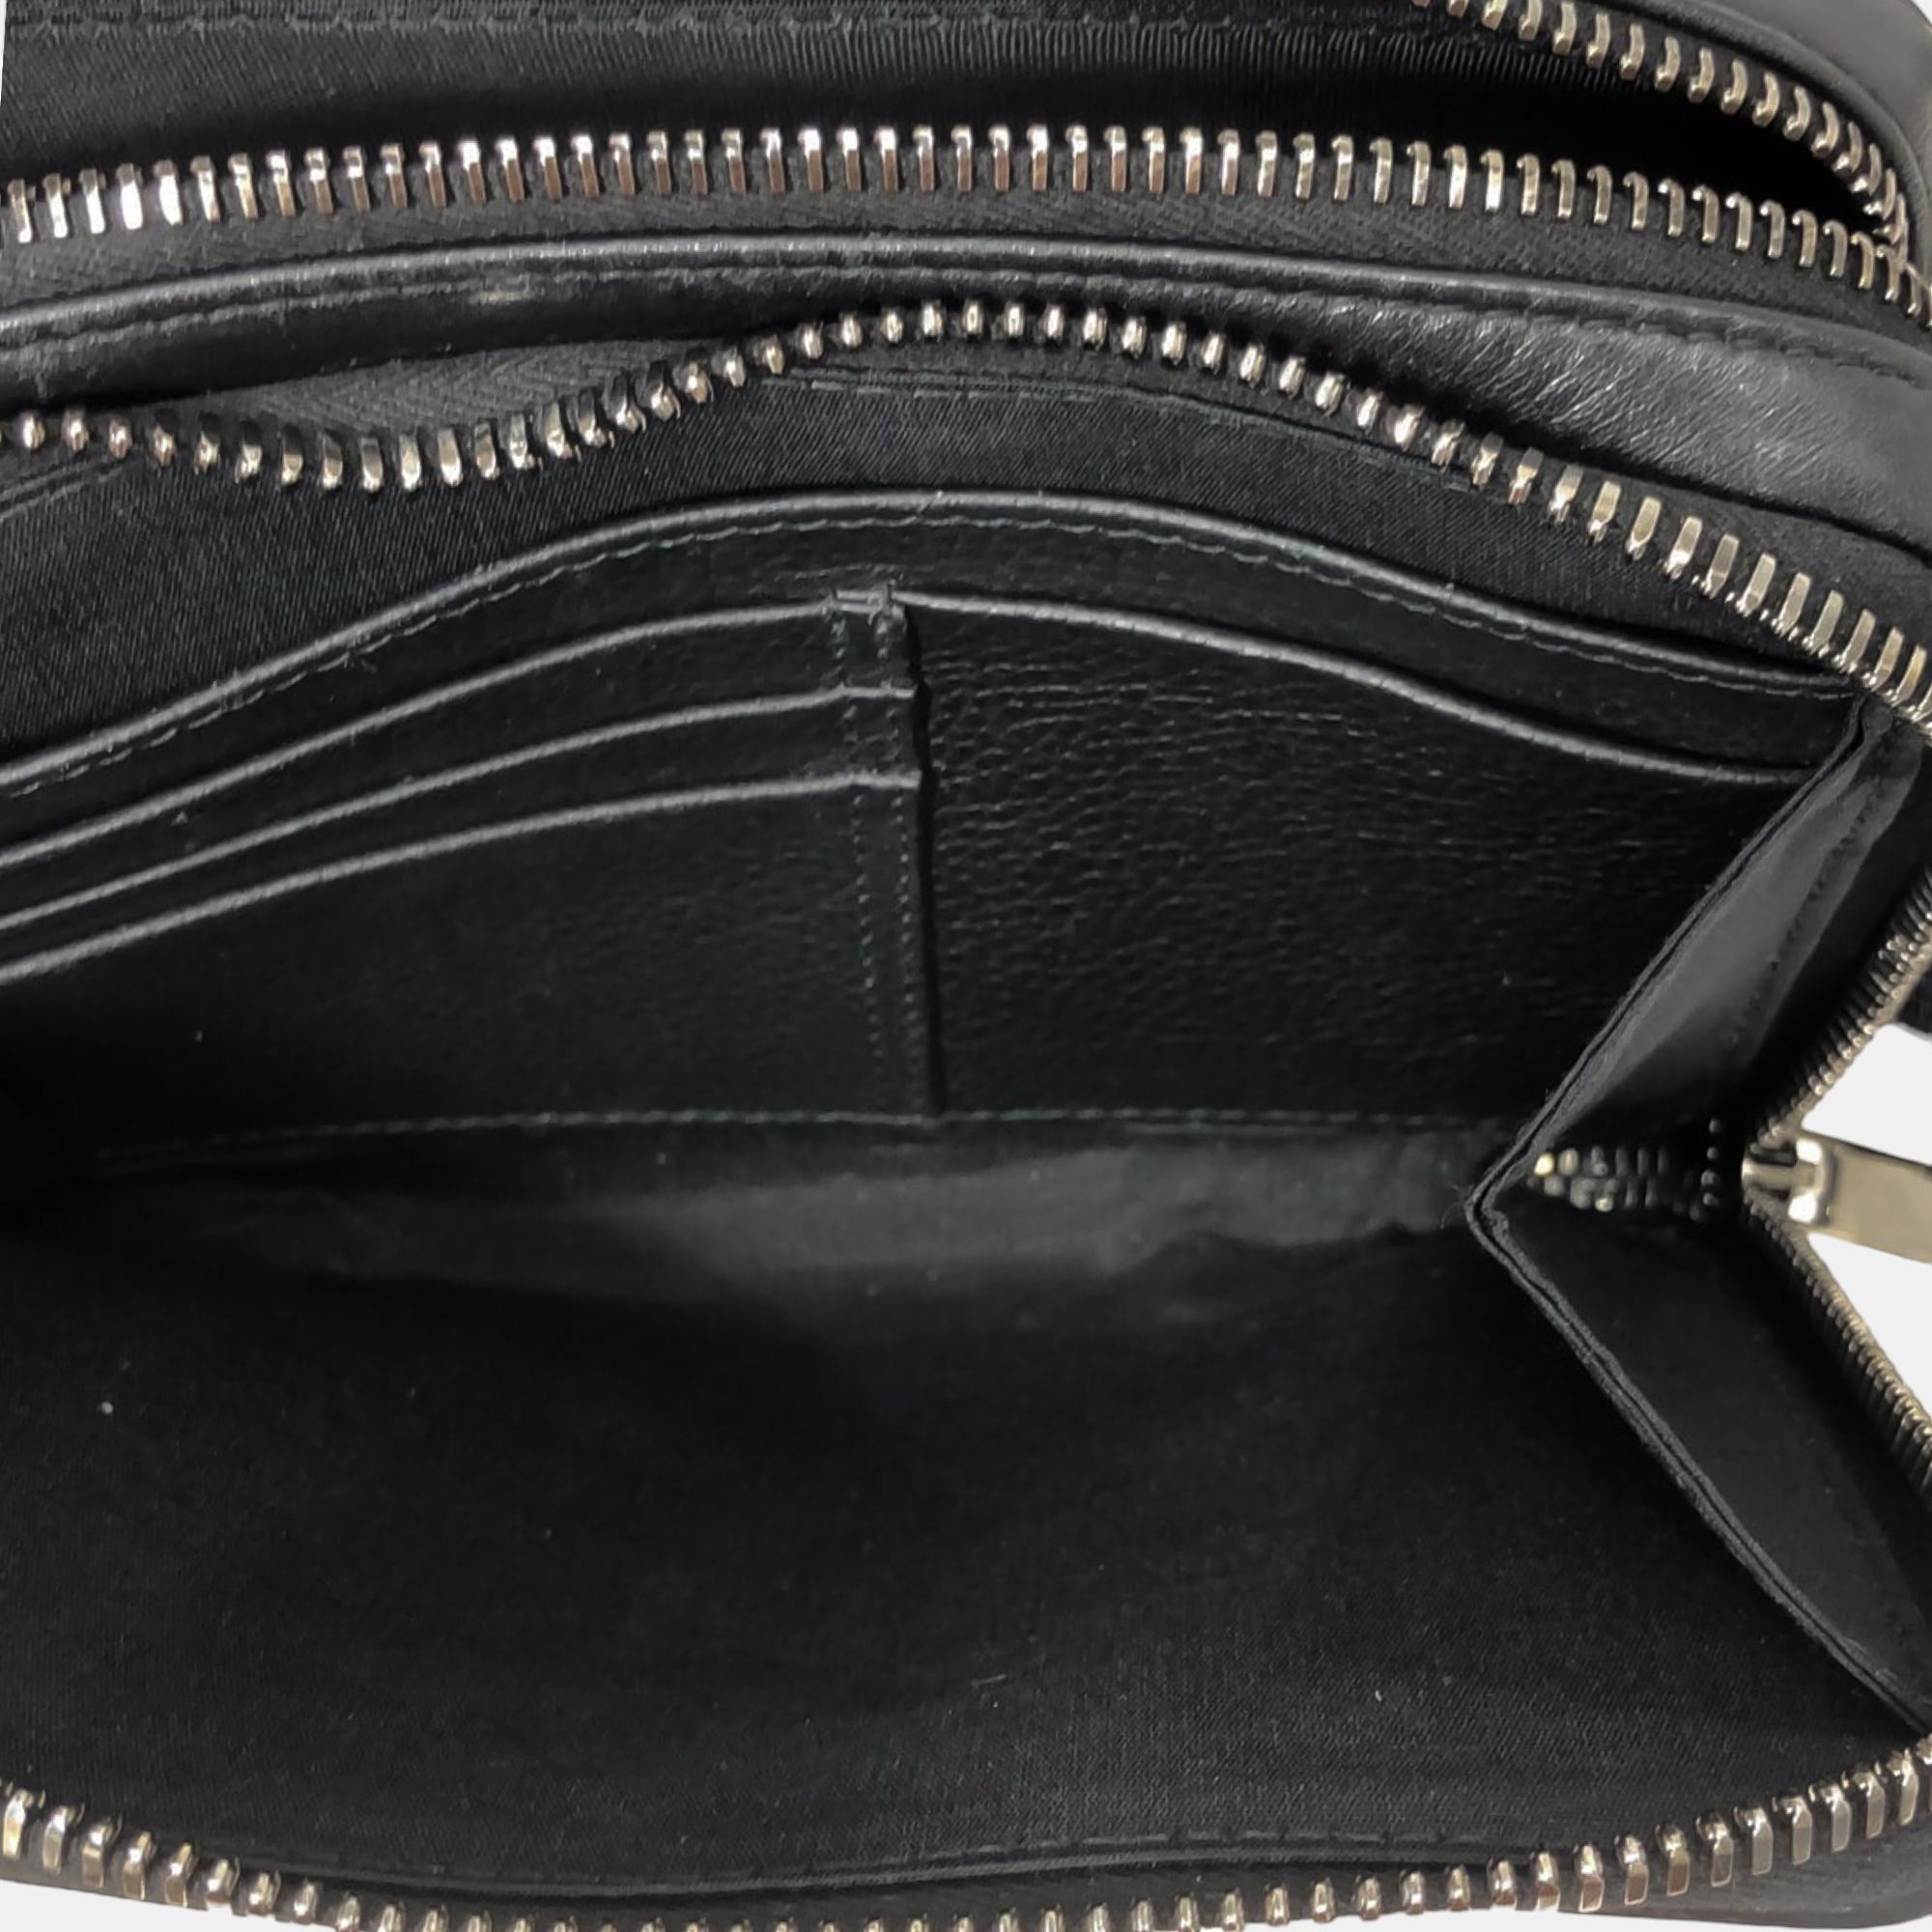 Dior Black Leather Pouch With Strap